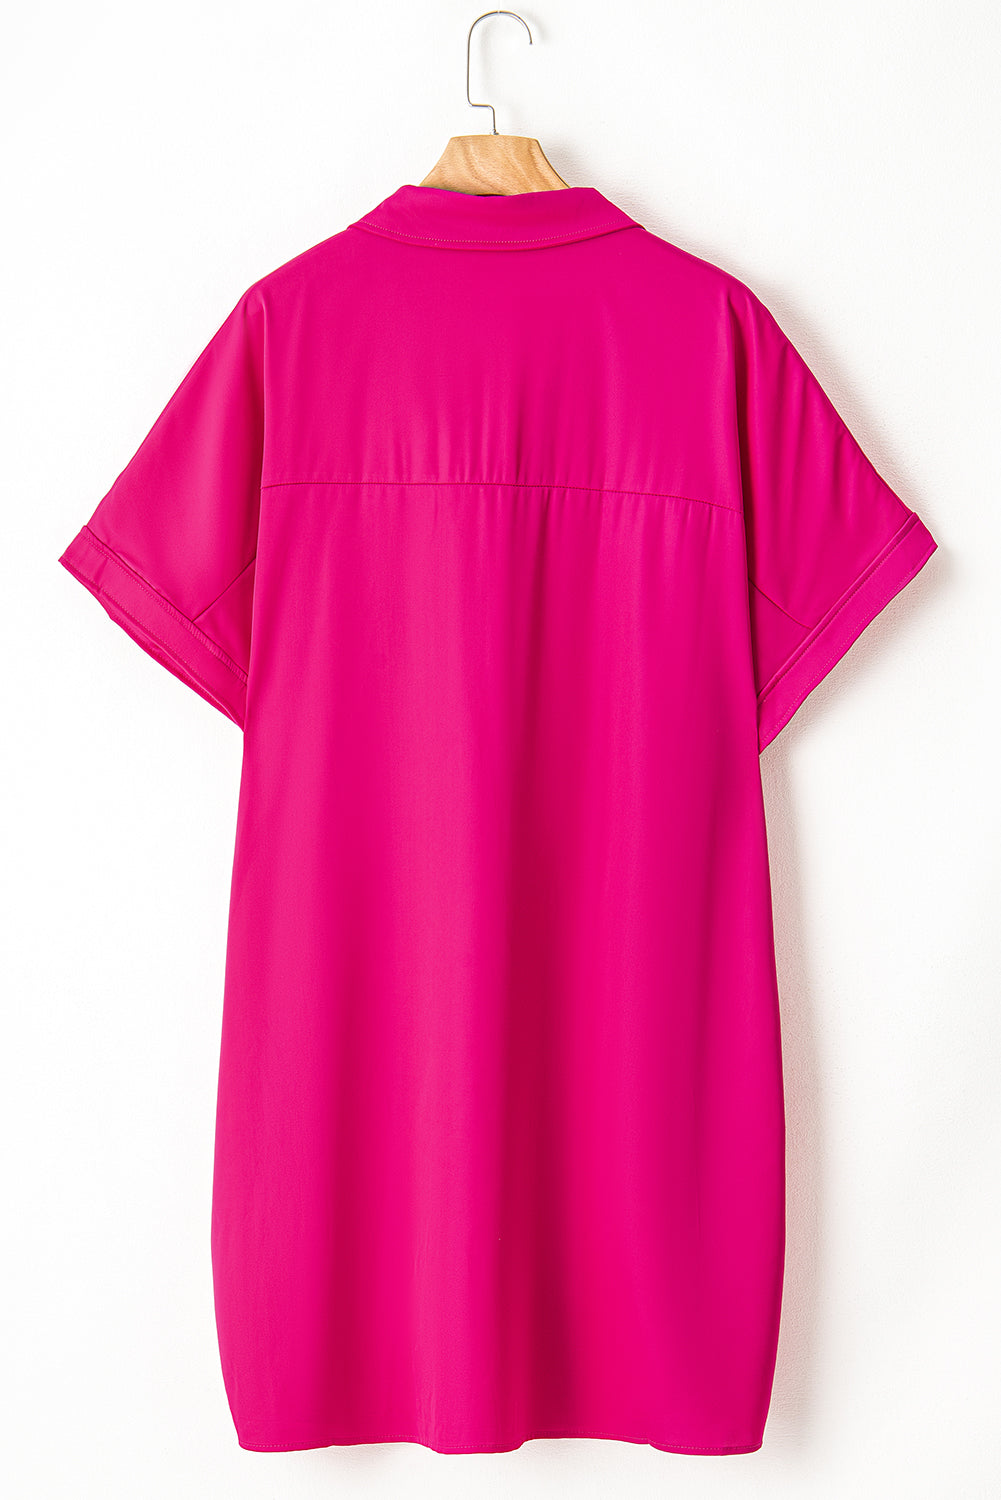 Bright Pink Collared V Neck Short Sleeve Plus Size Dress